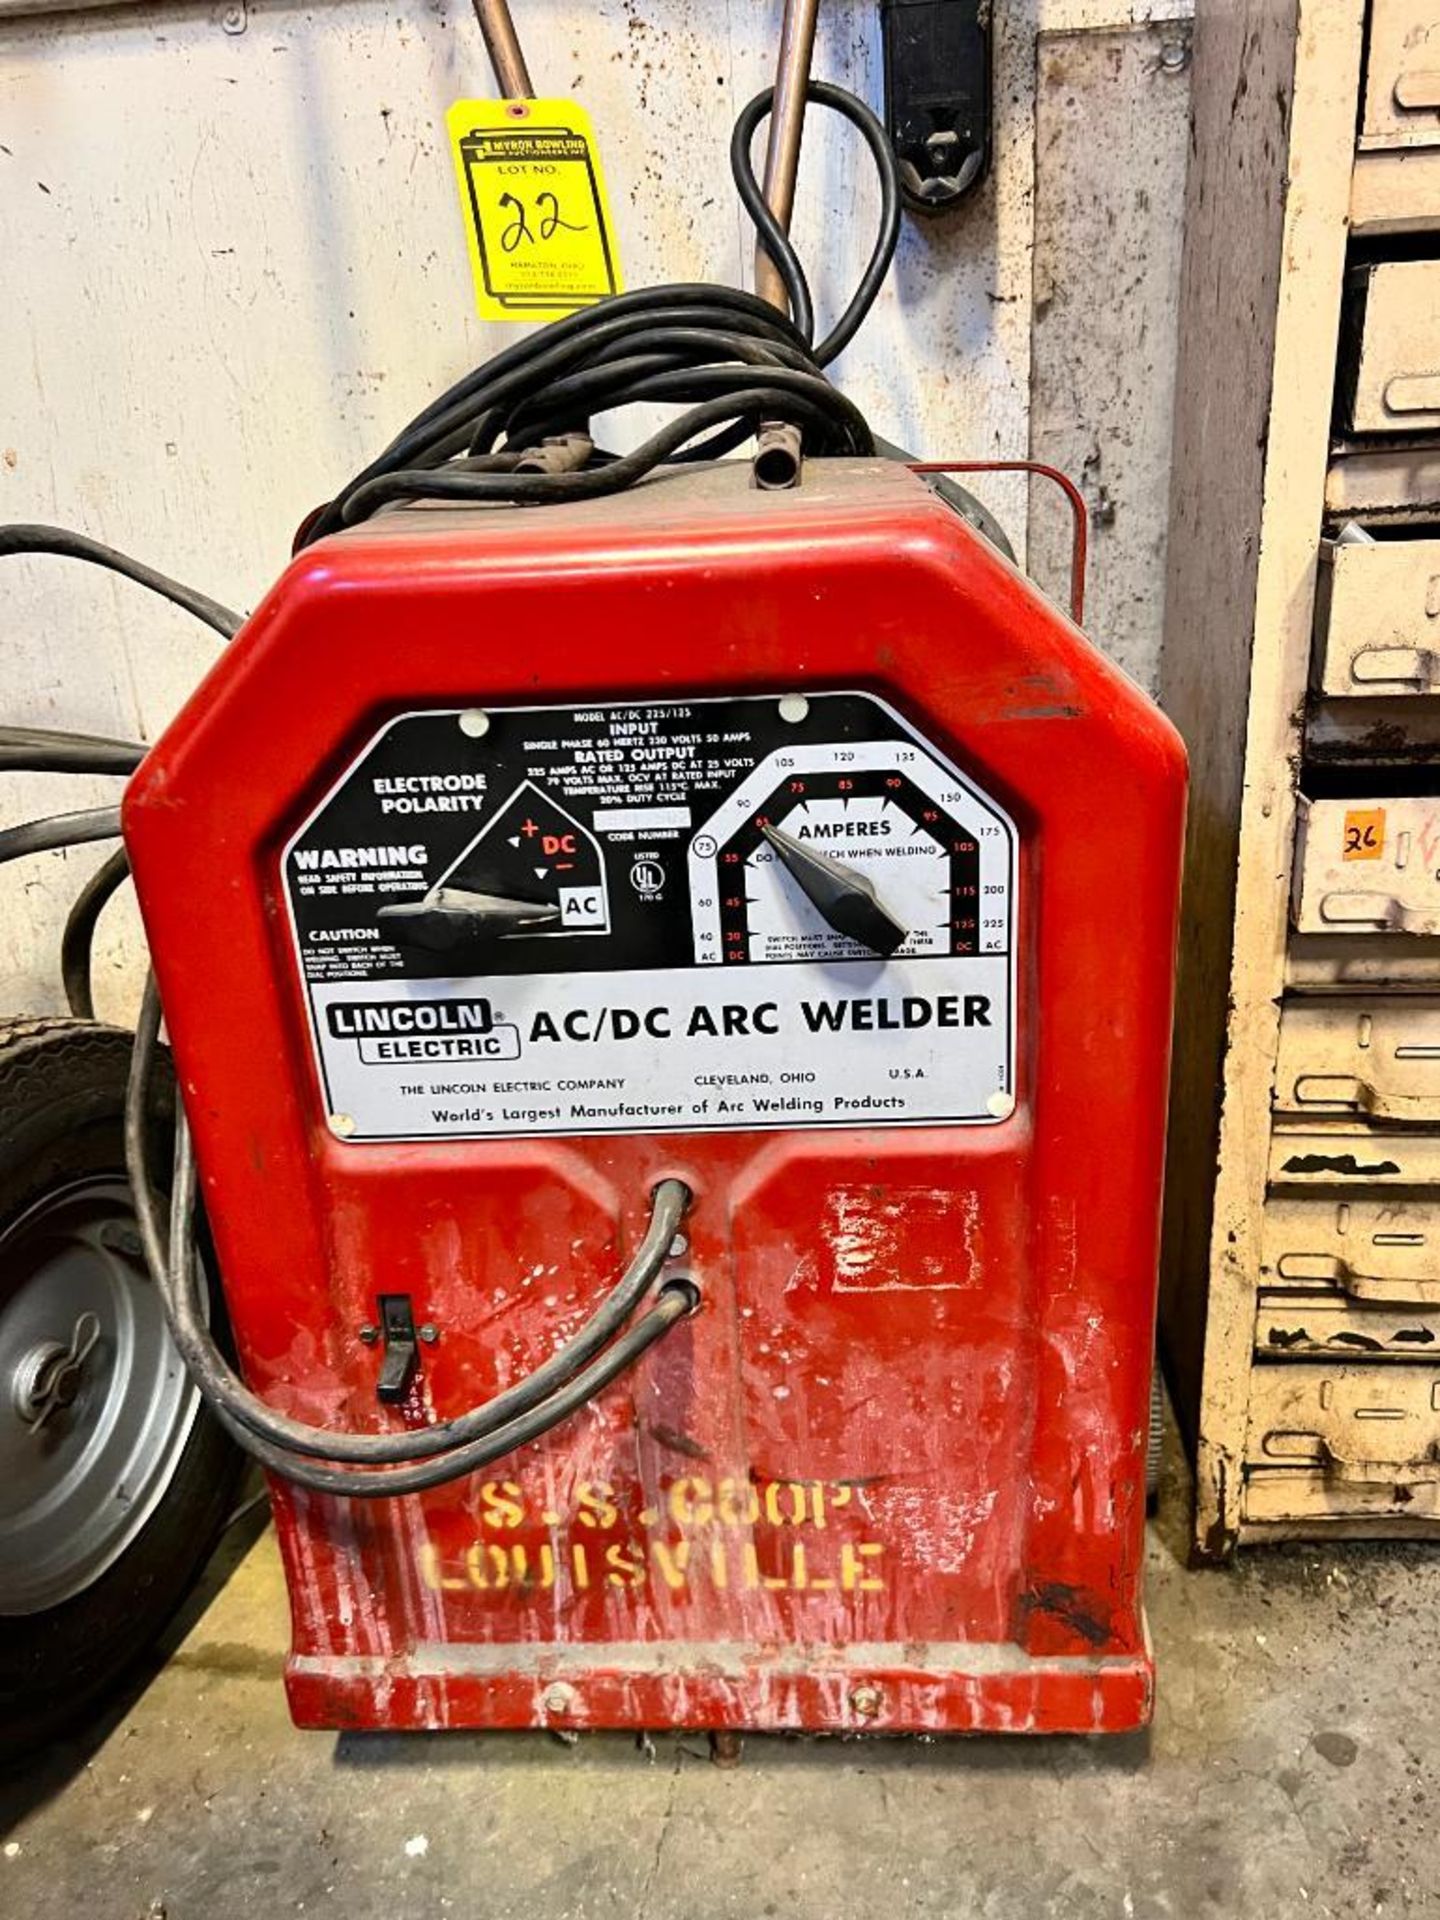 Lincoln Electric AC/DC Arc Welder, Code Number 881-502